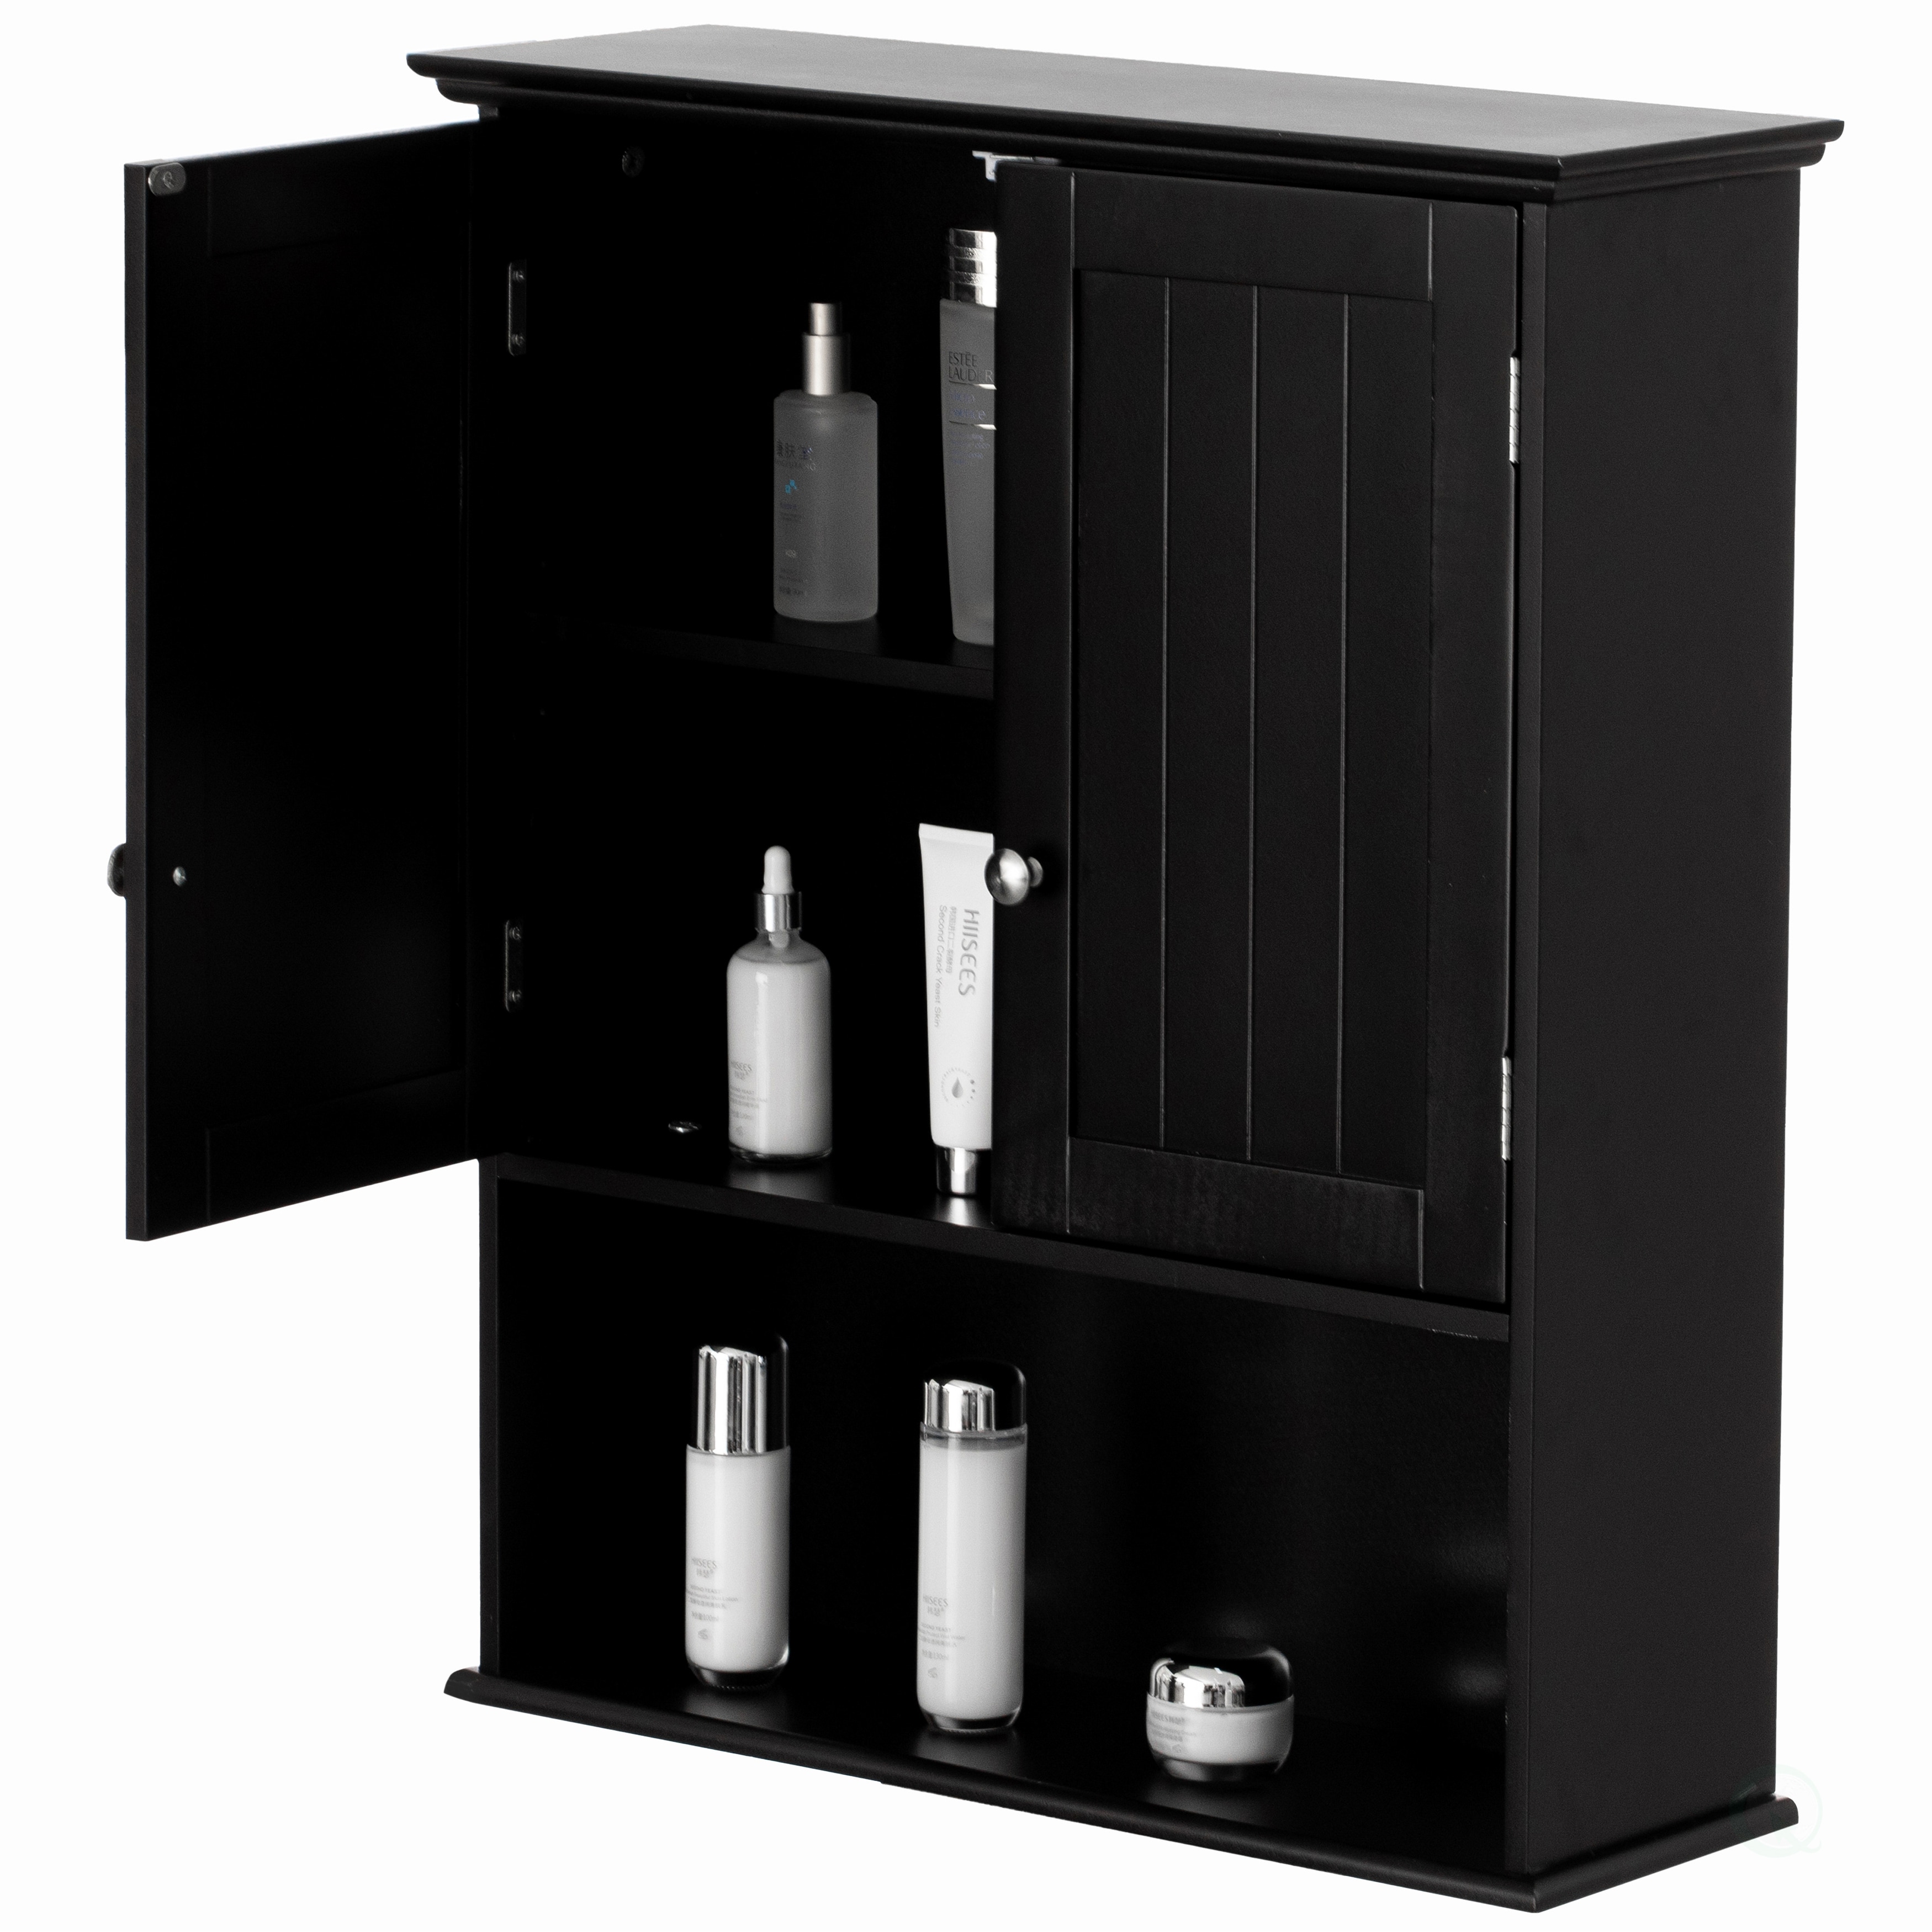 https://ak1.ostkcdn.com/images/products/is/images/direct/17b23c2b220b87b78cd588ce6c72fe5dda9bdebe/Bathroom-Cabinet-Wooden-Medicine-Cabinet-Storage-Organizer-Double-Door-with-2-Shelves%2C-and-Open-Display-Shelf.jpg